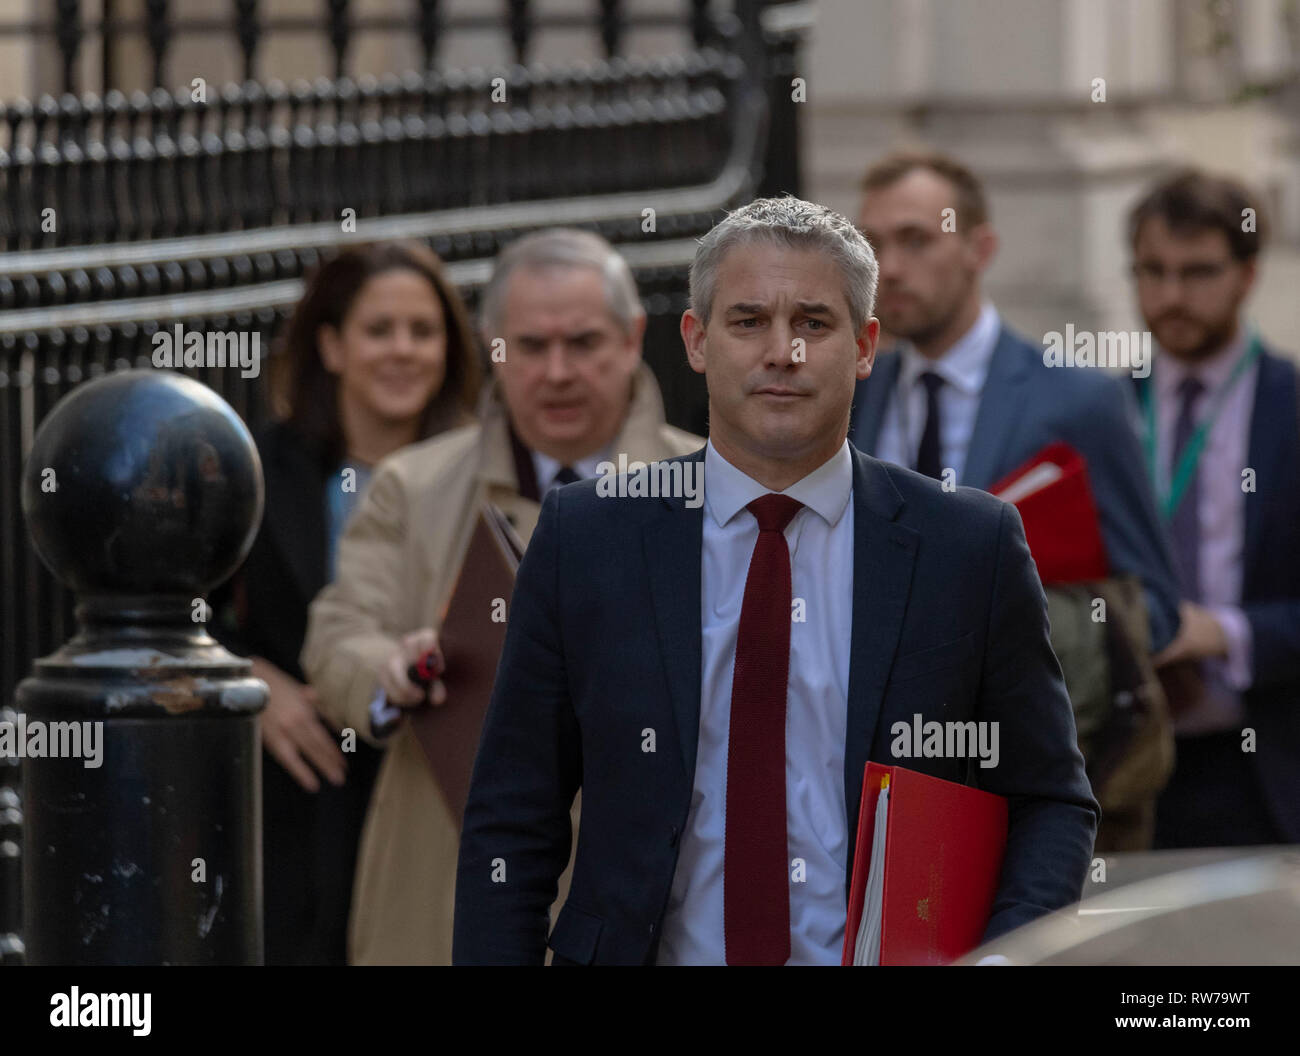 London, UK. 5th March 2019, Stephen Barclay, MP PC, Brexit Secretary and Geoffrey, Cox Attorney General leave Downing Street for the latest round of Brexit negotiations, London, UK. Credit: Ian Davidson/Alamy Live News Stock Photo